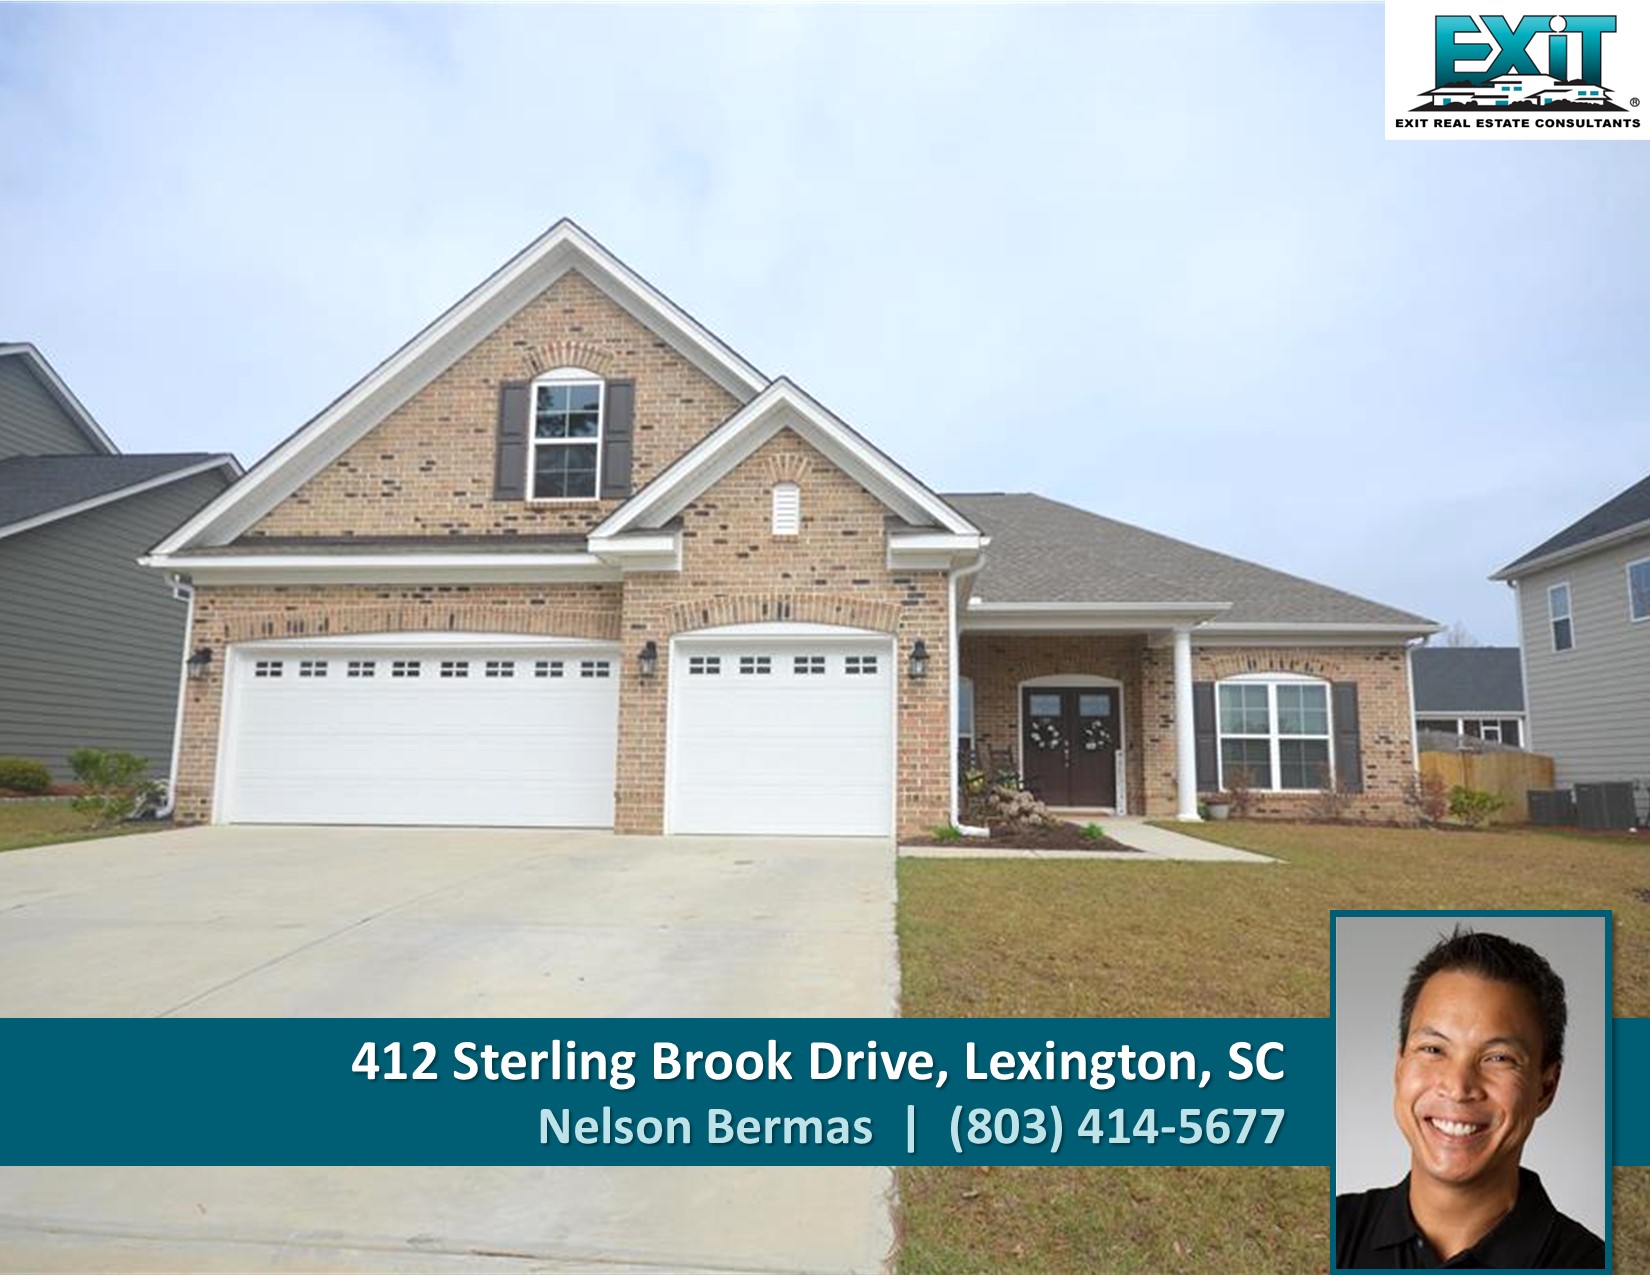 Just listed in Sterling Bridge